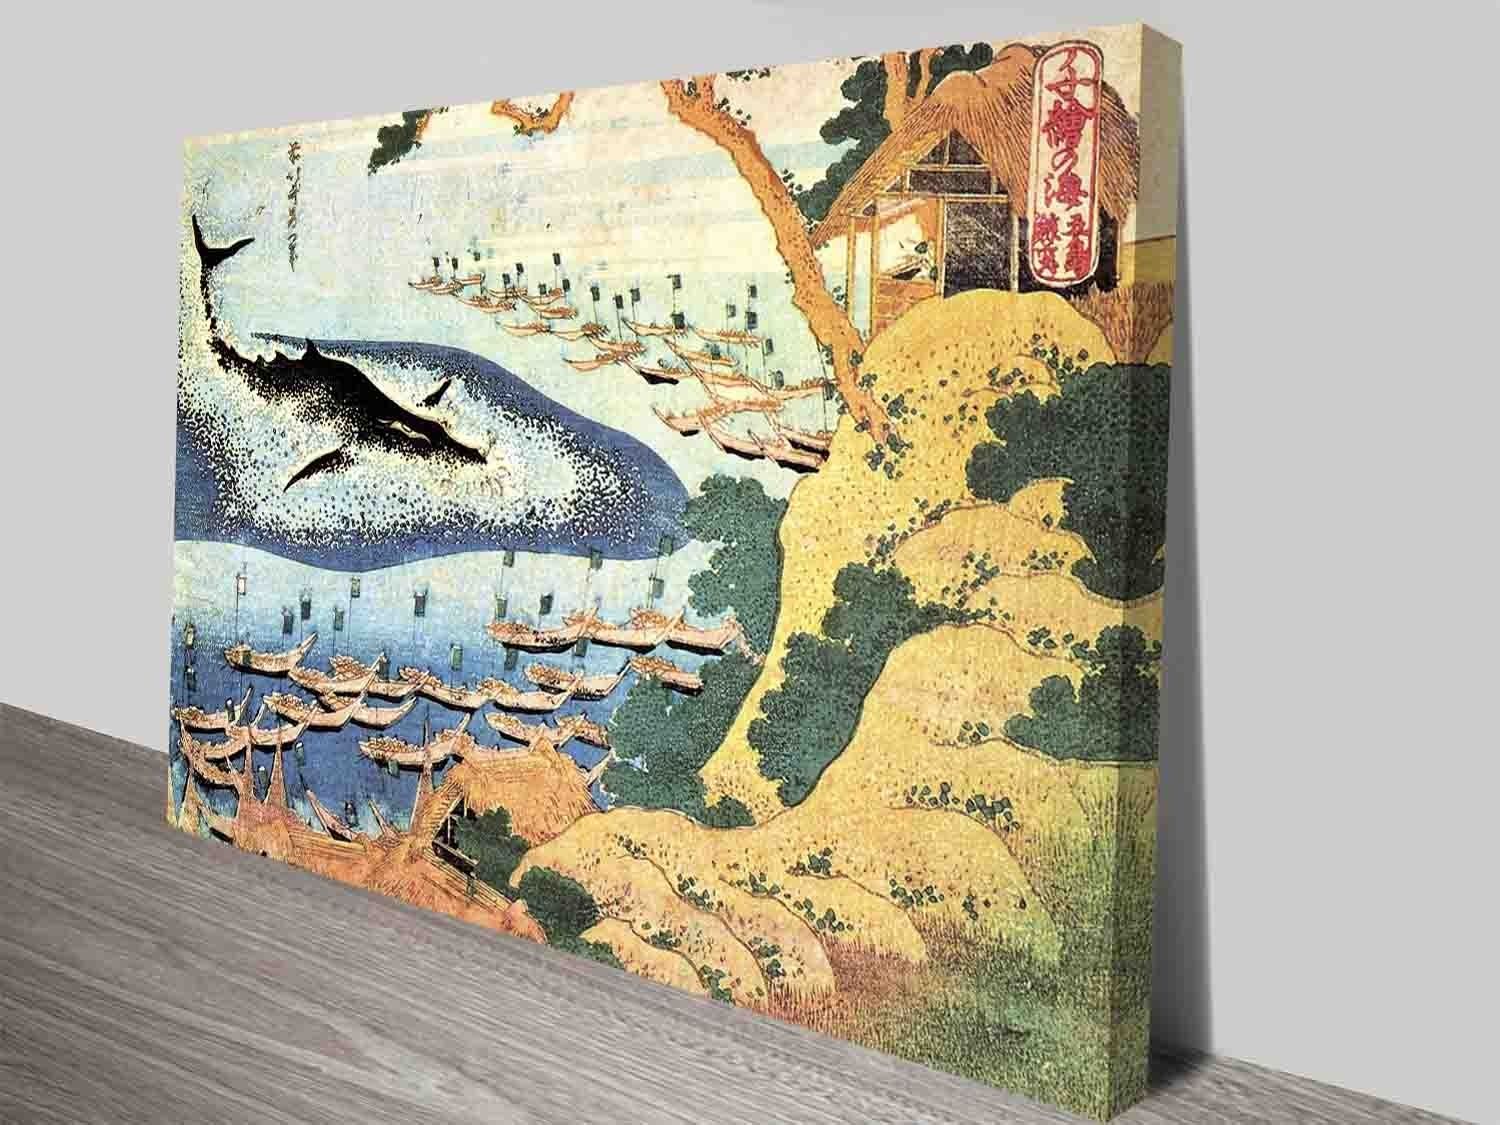 Katsushika Hokusai Ocean Landscape And Whale Wall Art Prints On Pertaining To Whale Canvas Wall Art (View 2 of 20)